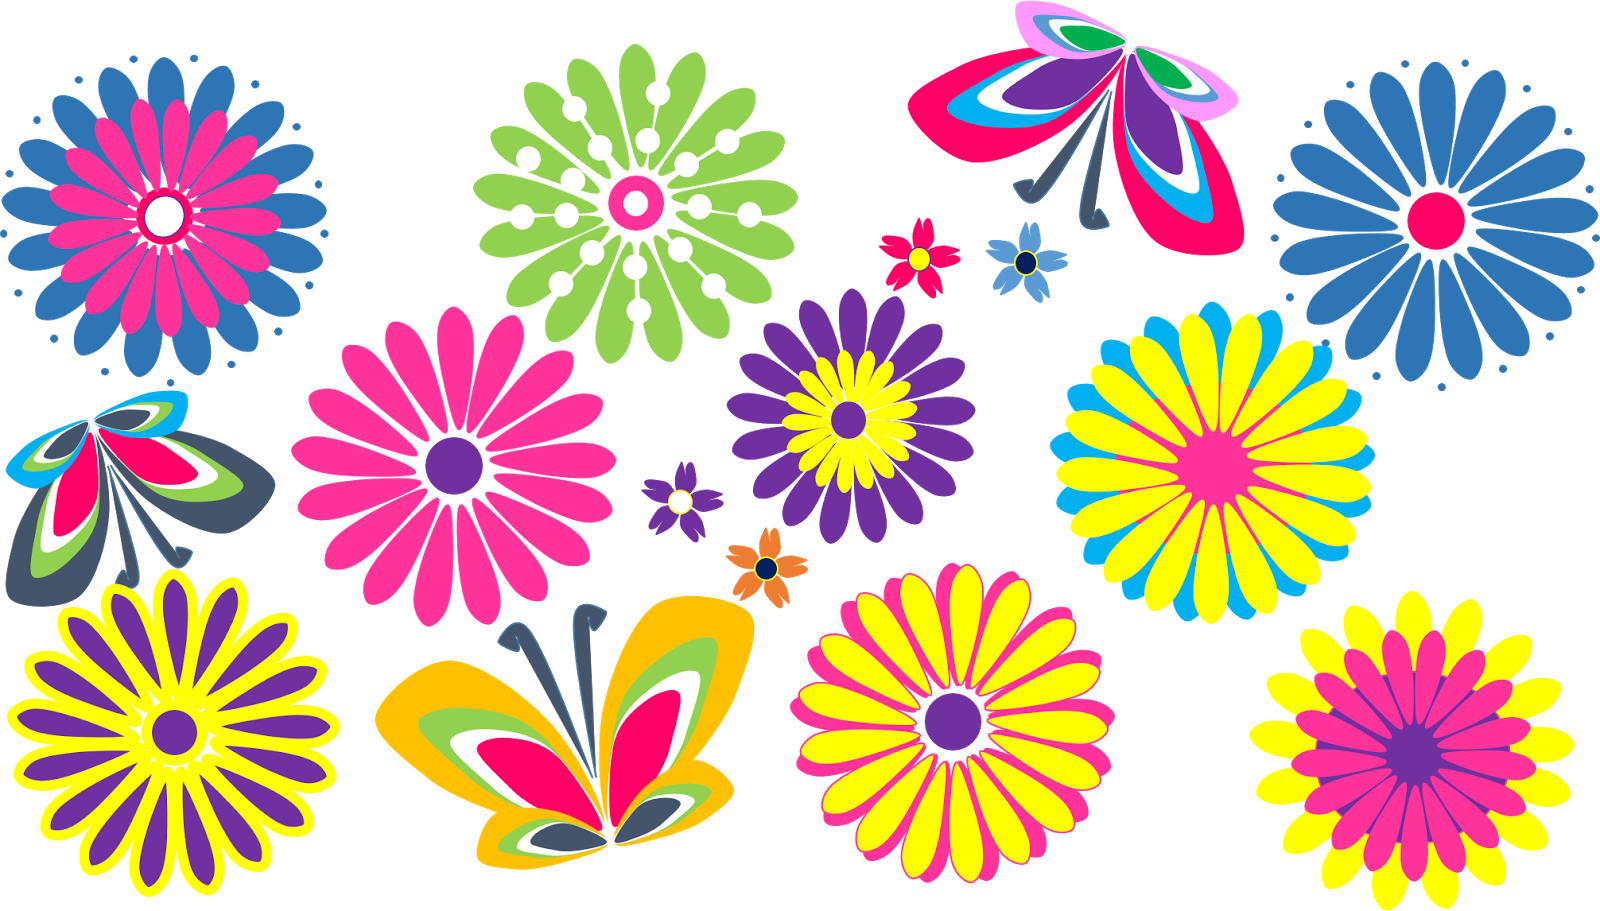 flowers flashcards for kids